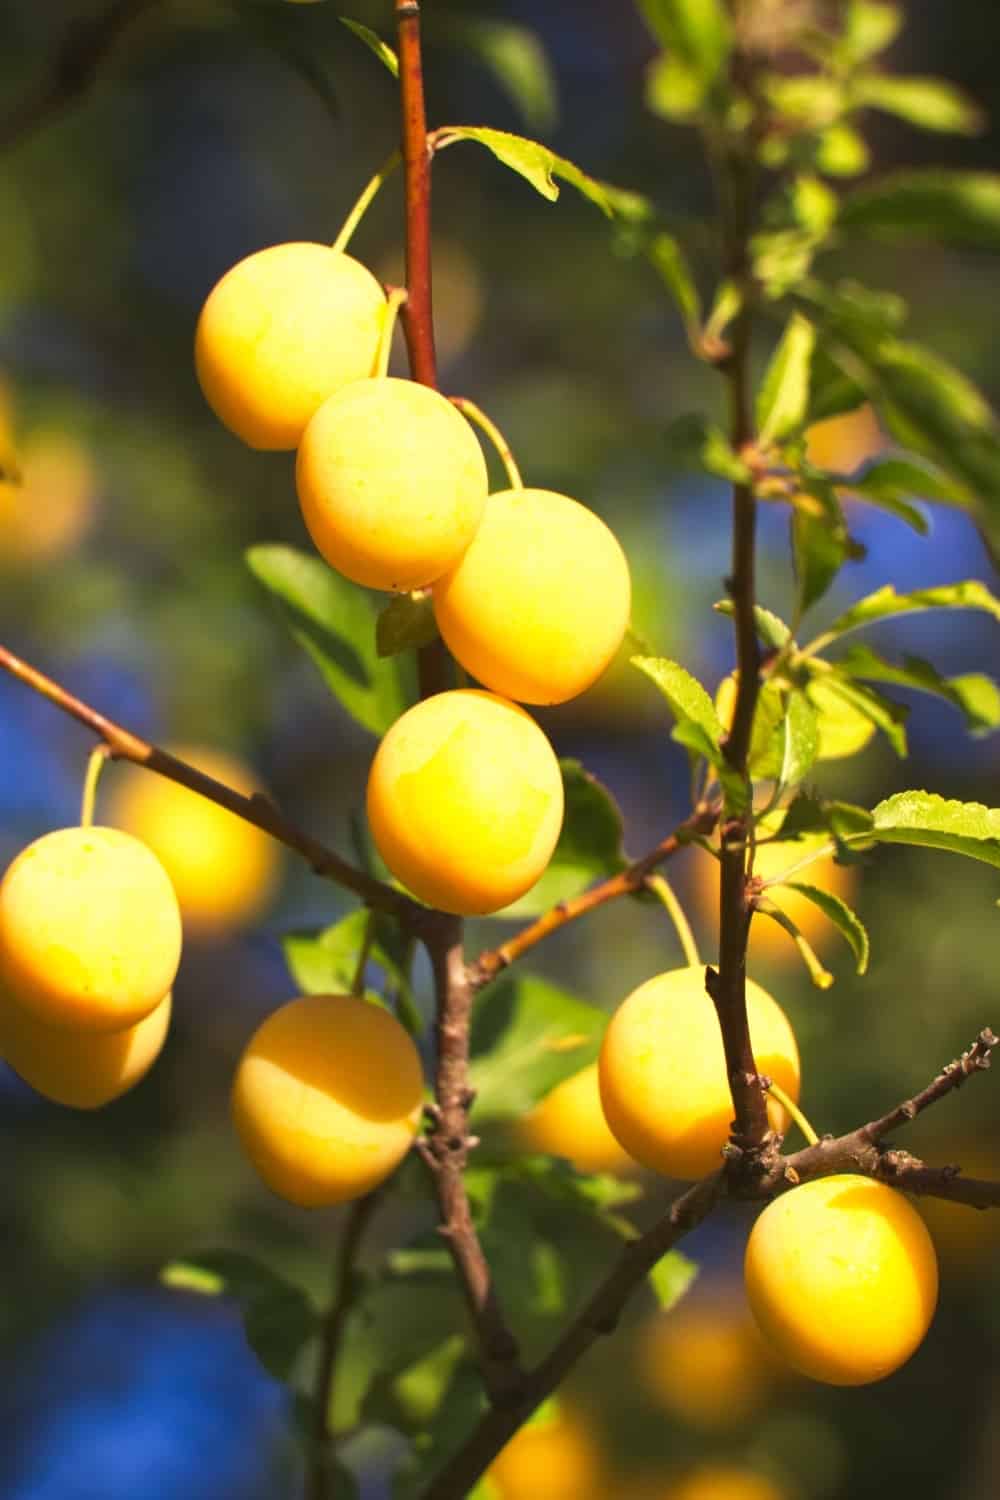 Yellow mirabelle plums